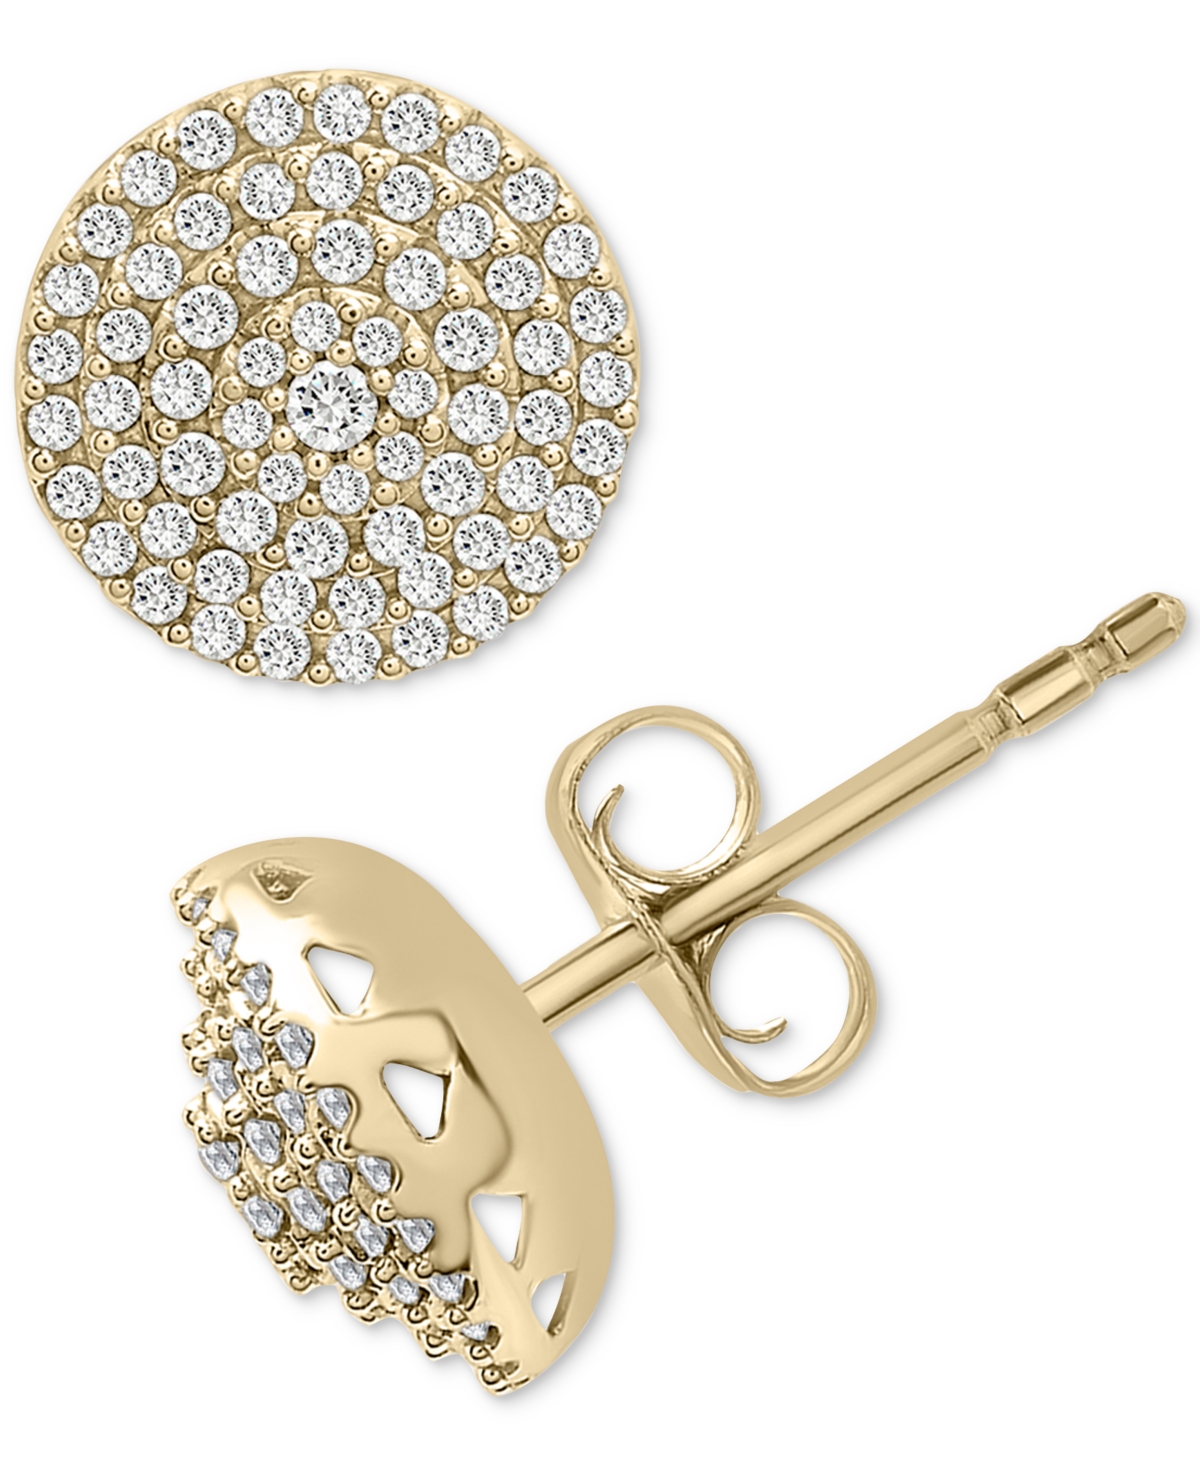 Diamond Circle Stud Earrings (1/2 ct. t.w.) in 14k Gold, Created for Macy's - Yellow Gold